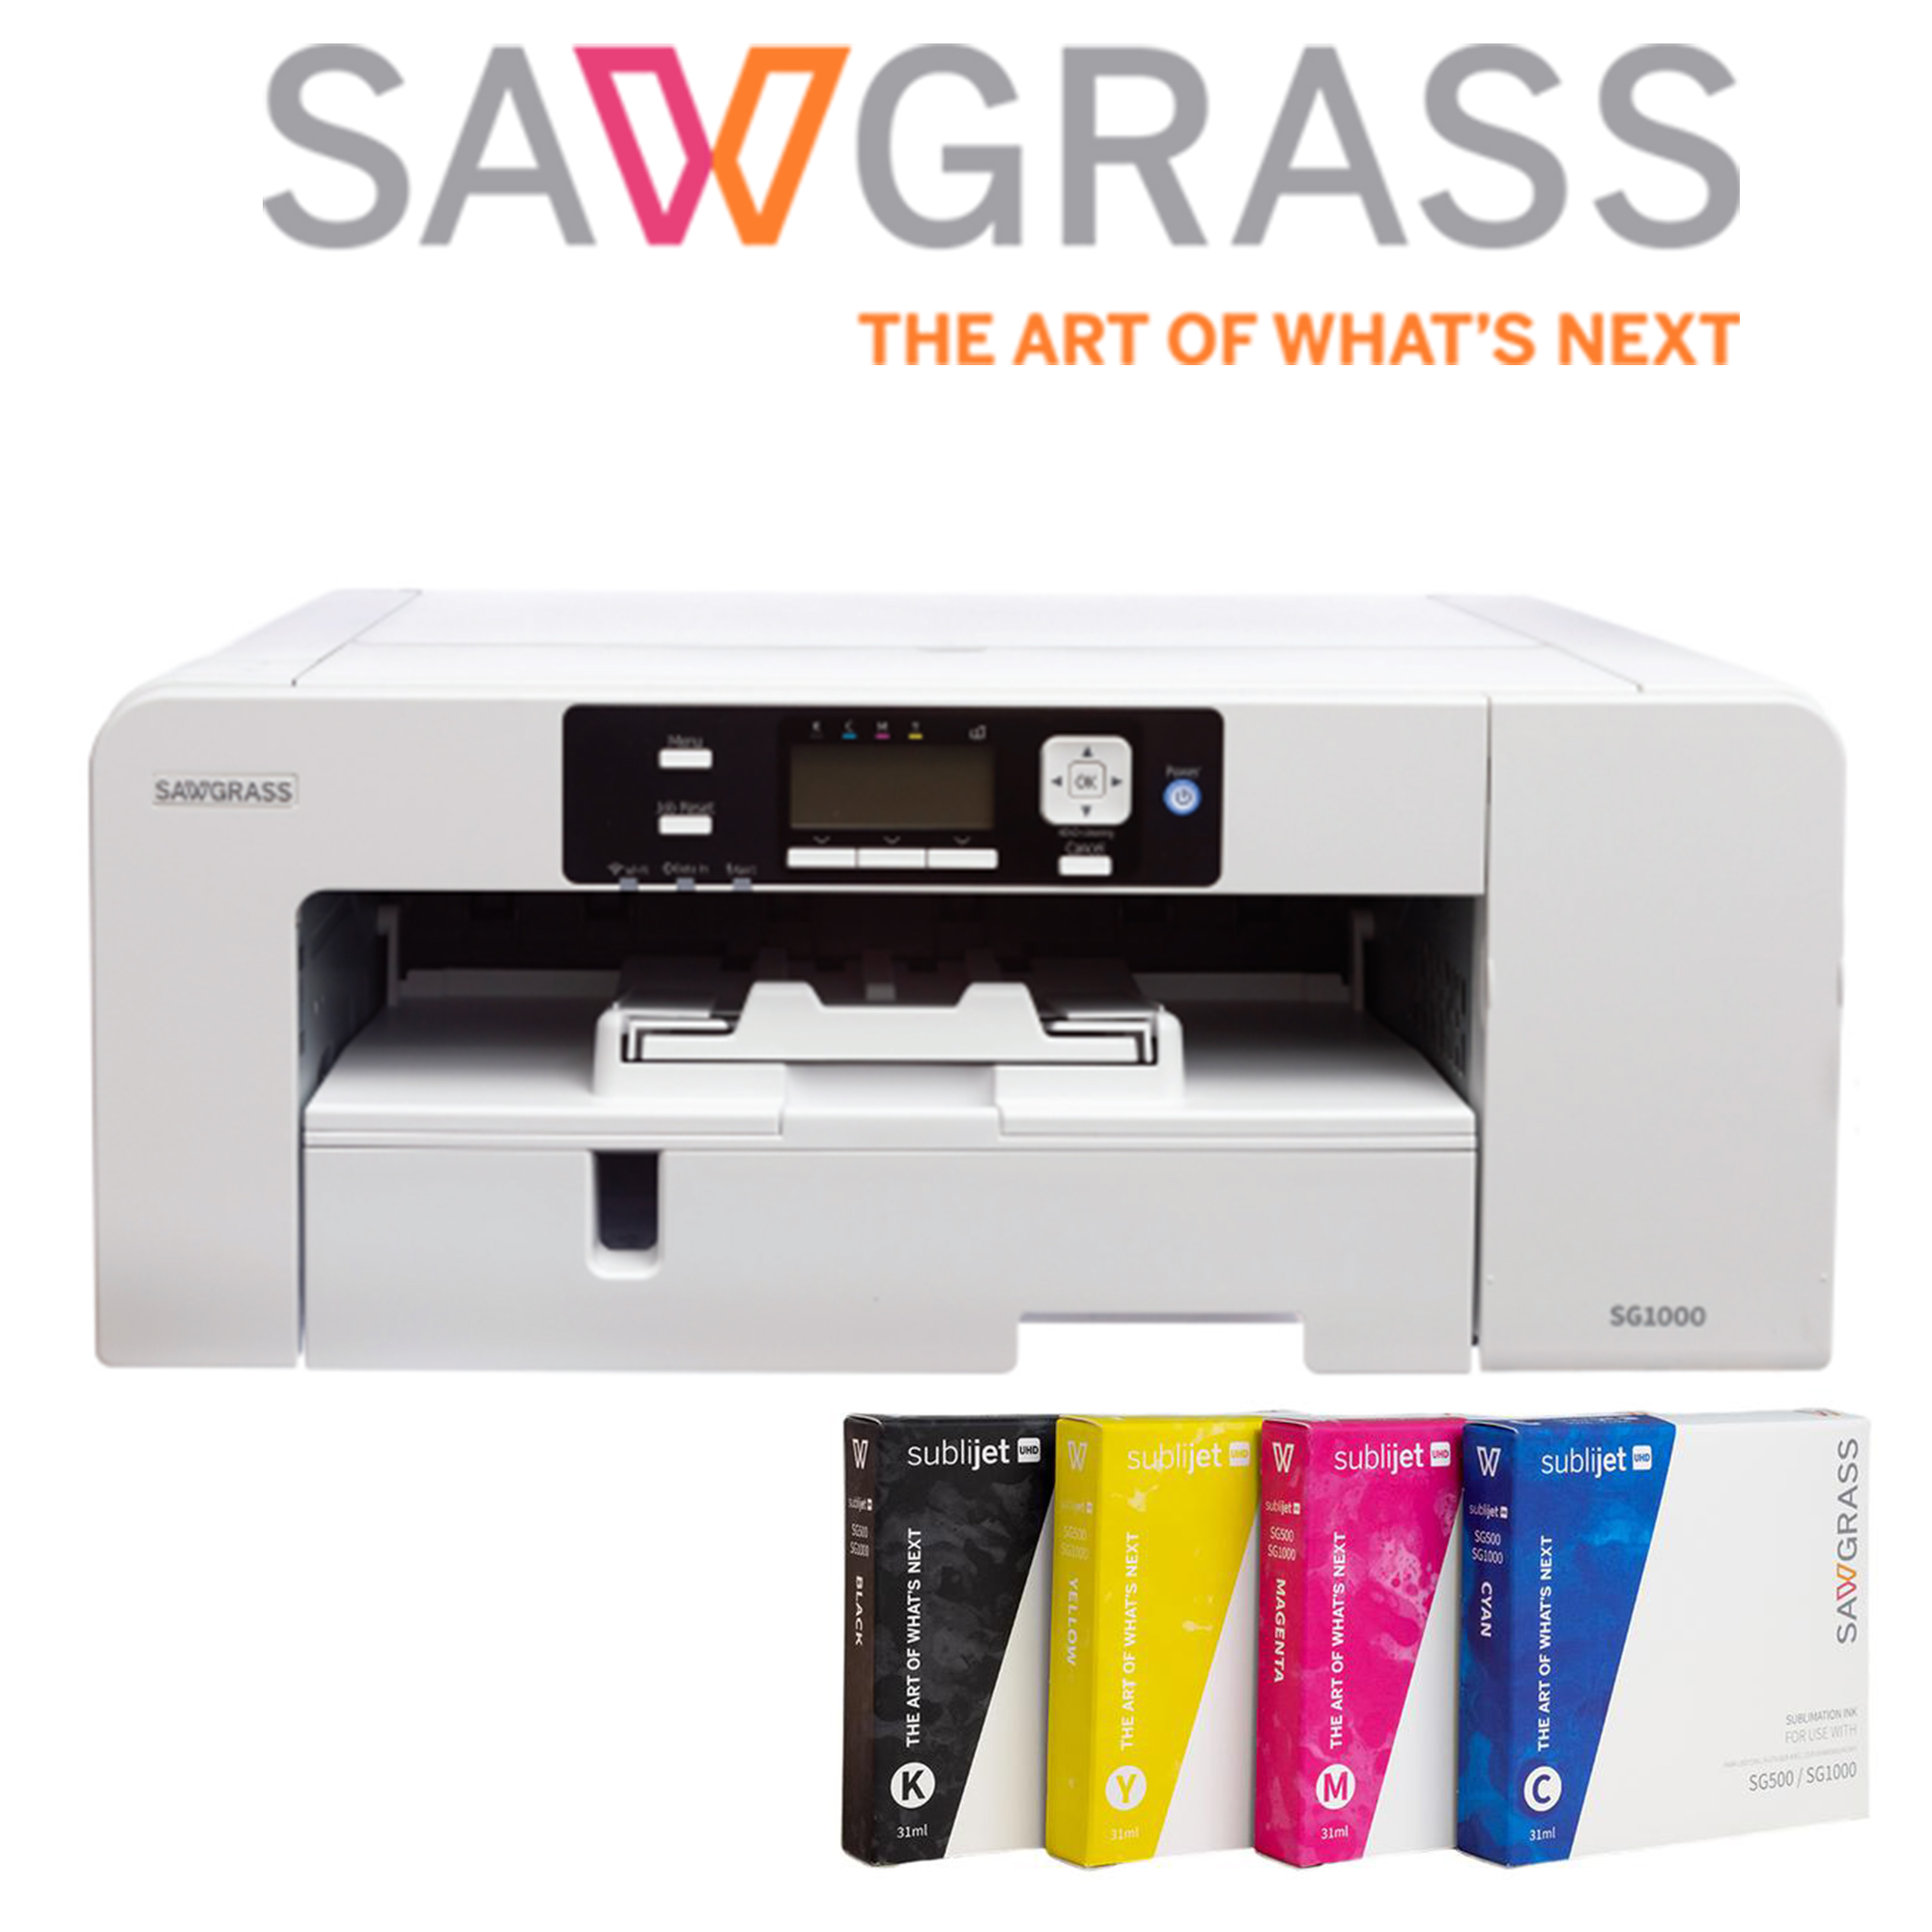 Are you getting the most from your Sawgrass SG1000 printer?